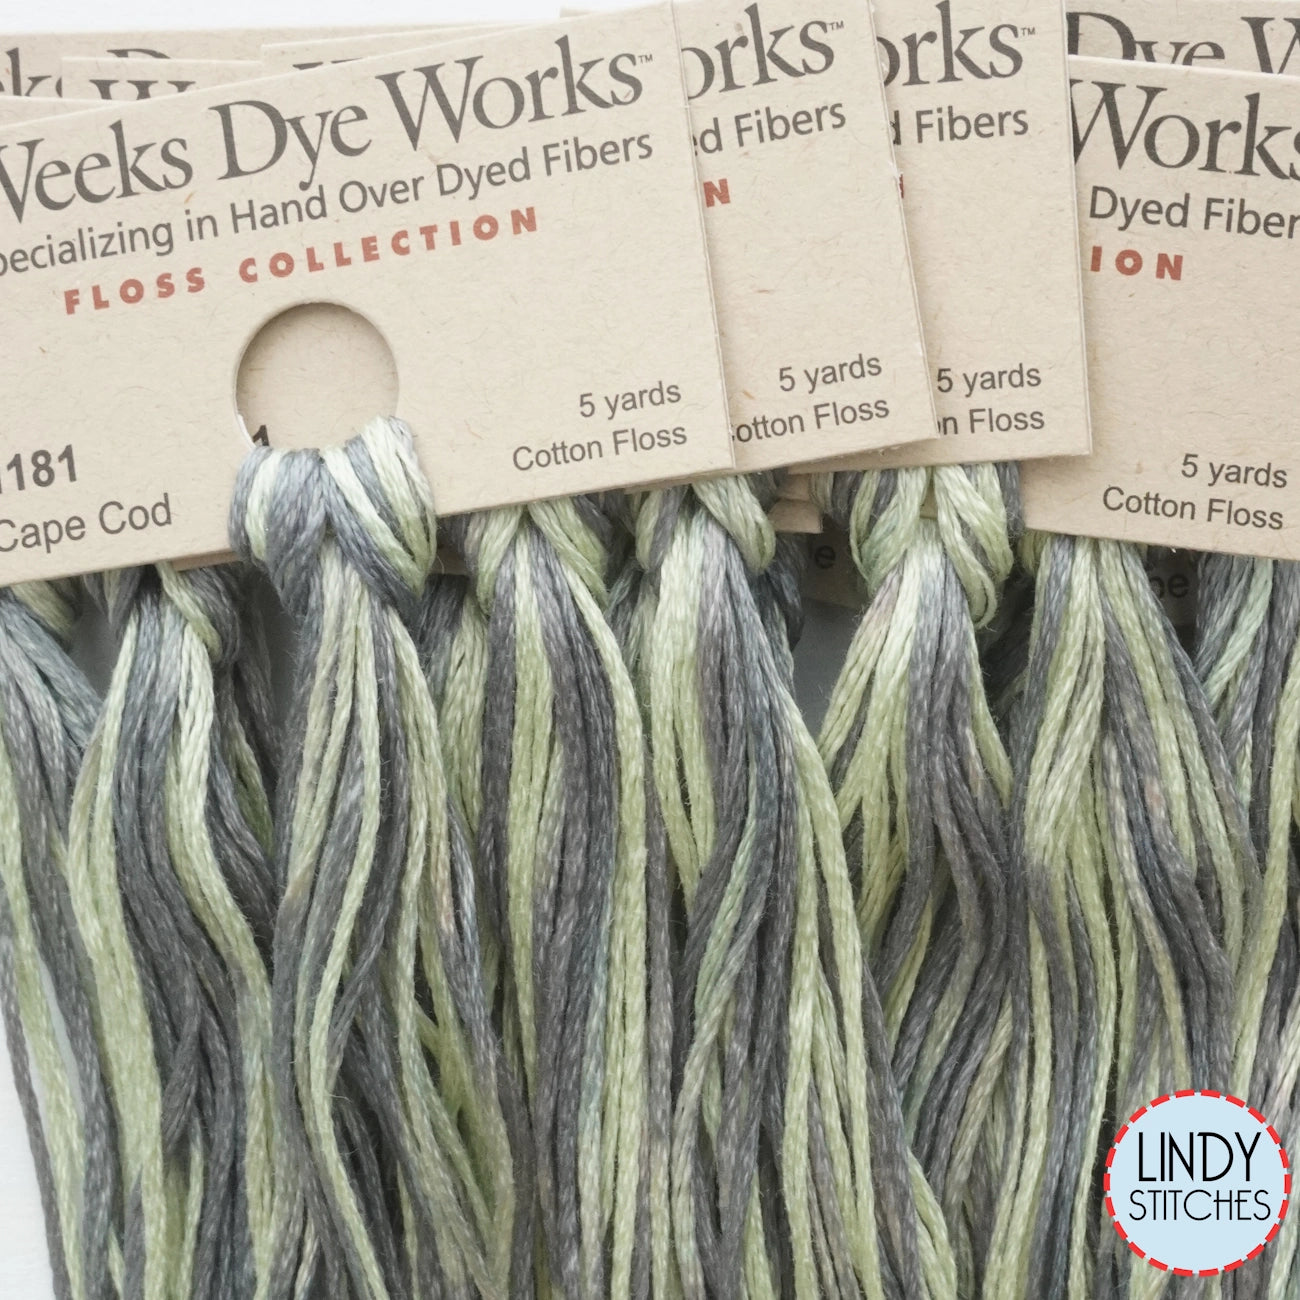 Cape Cod Weeks Dye Works Floss Hand Dyed Cotton Skein 1181